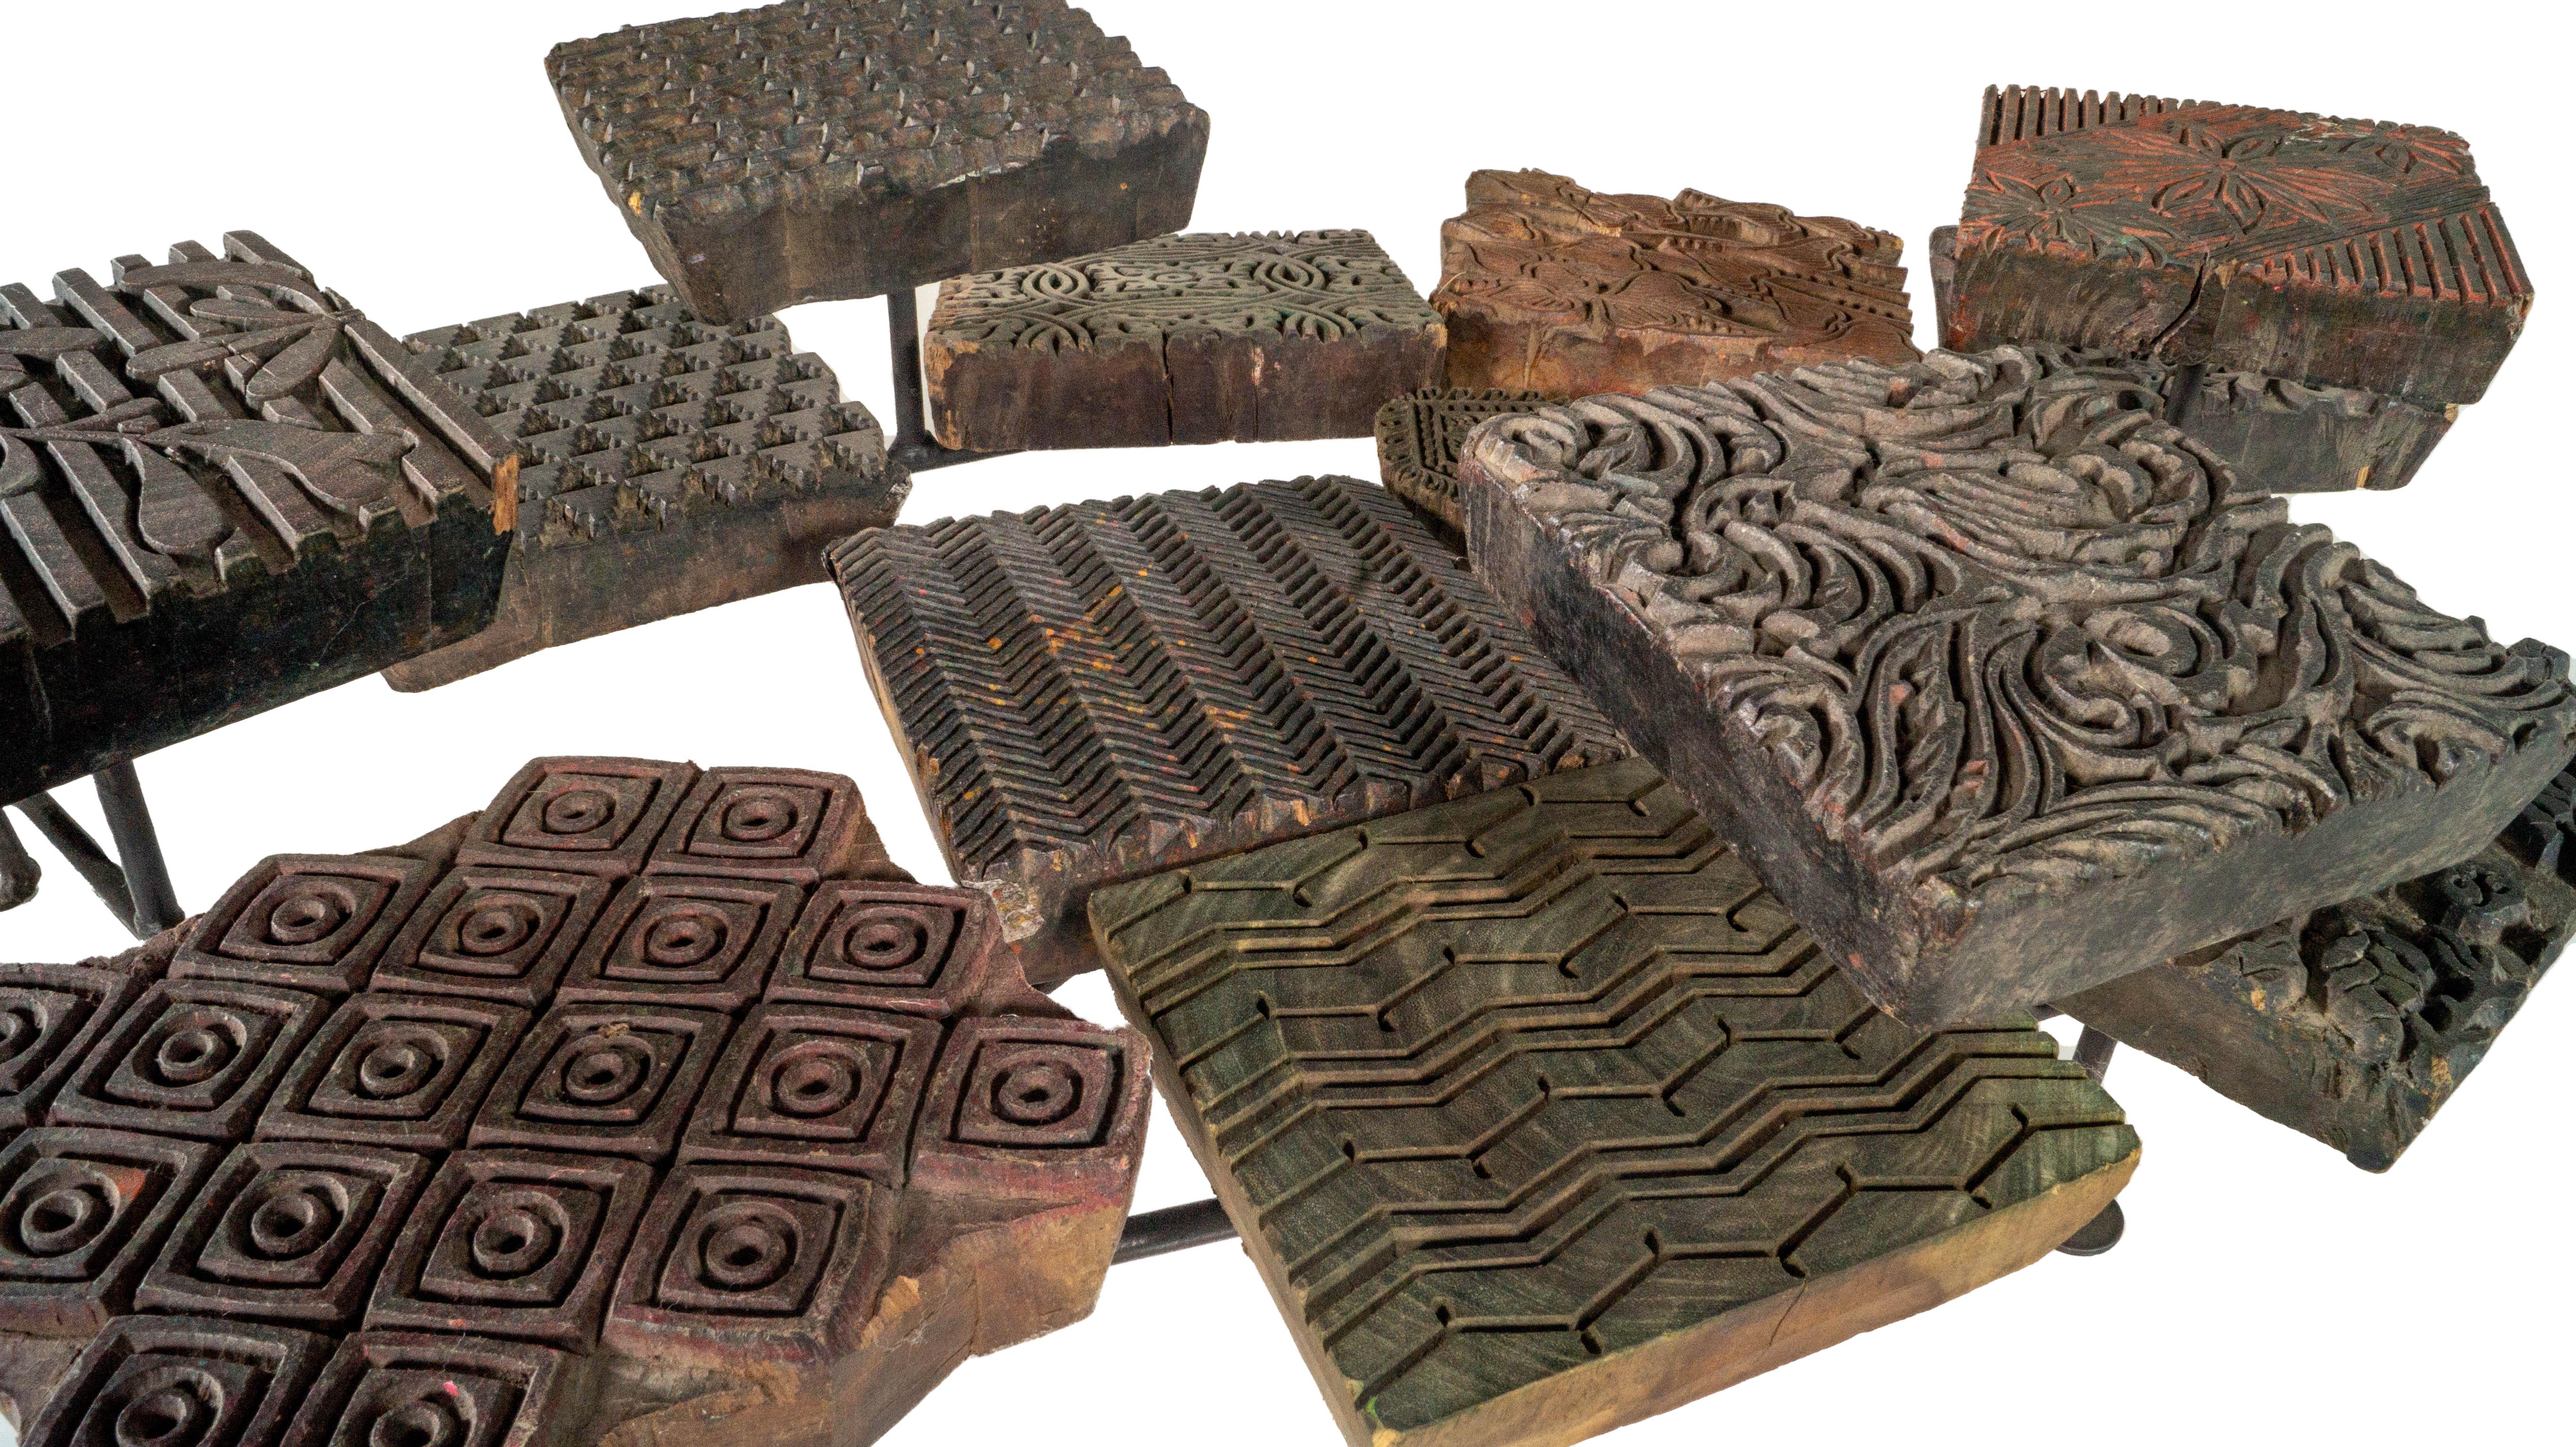 These vintage printing blocks displayed on a potruding metal stands are from our one of a kind LeMonde collection and are sources from France. The vintage printing blocks are great multi-textural, three dimensionsal elements to add to a wall. The